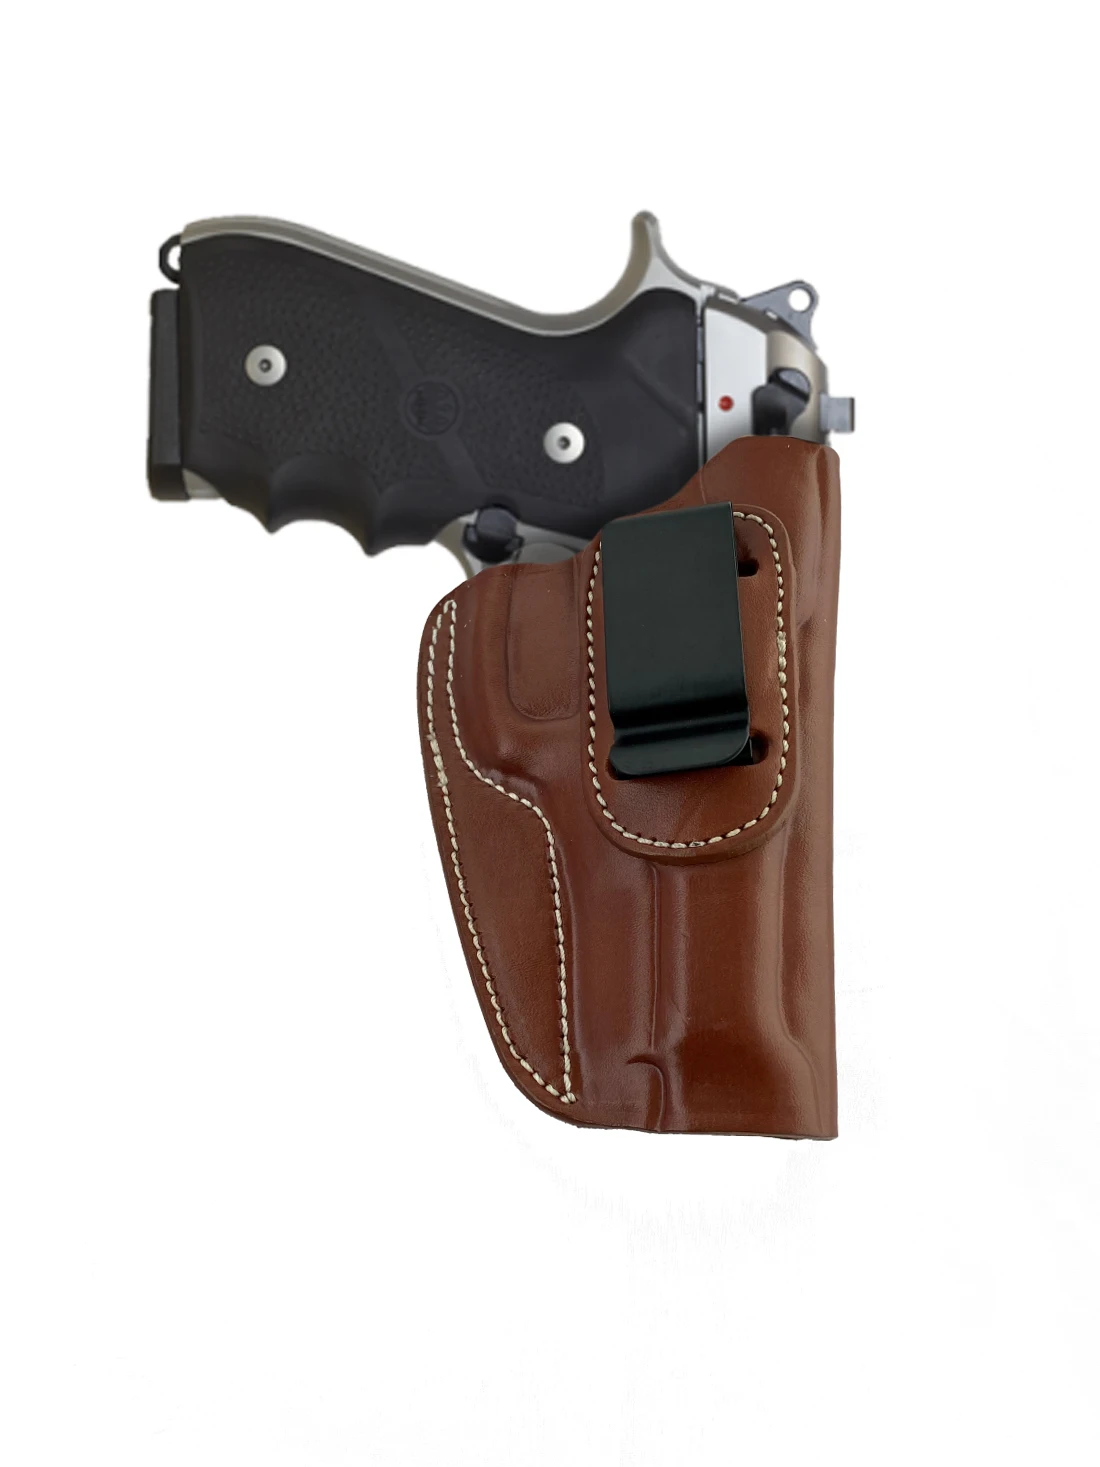 Leather Gun Holster For Stoeger Cougar 8000 Iwb Metal Clip Inside The Waist Band Carry Handmade Pistol Pouch Weapon Accessory